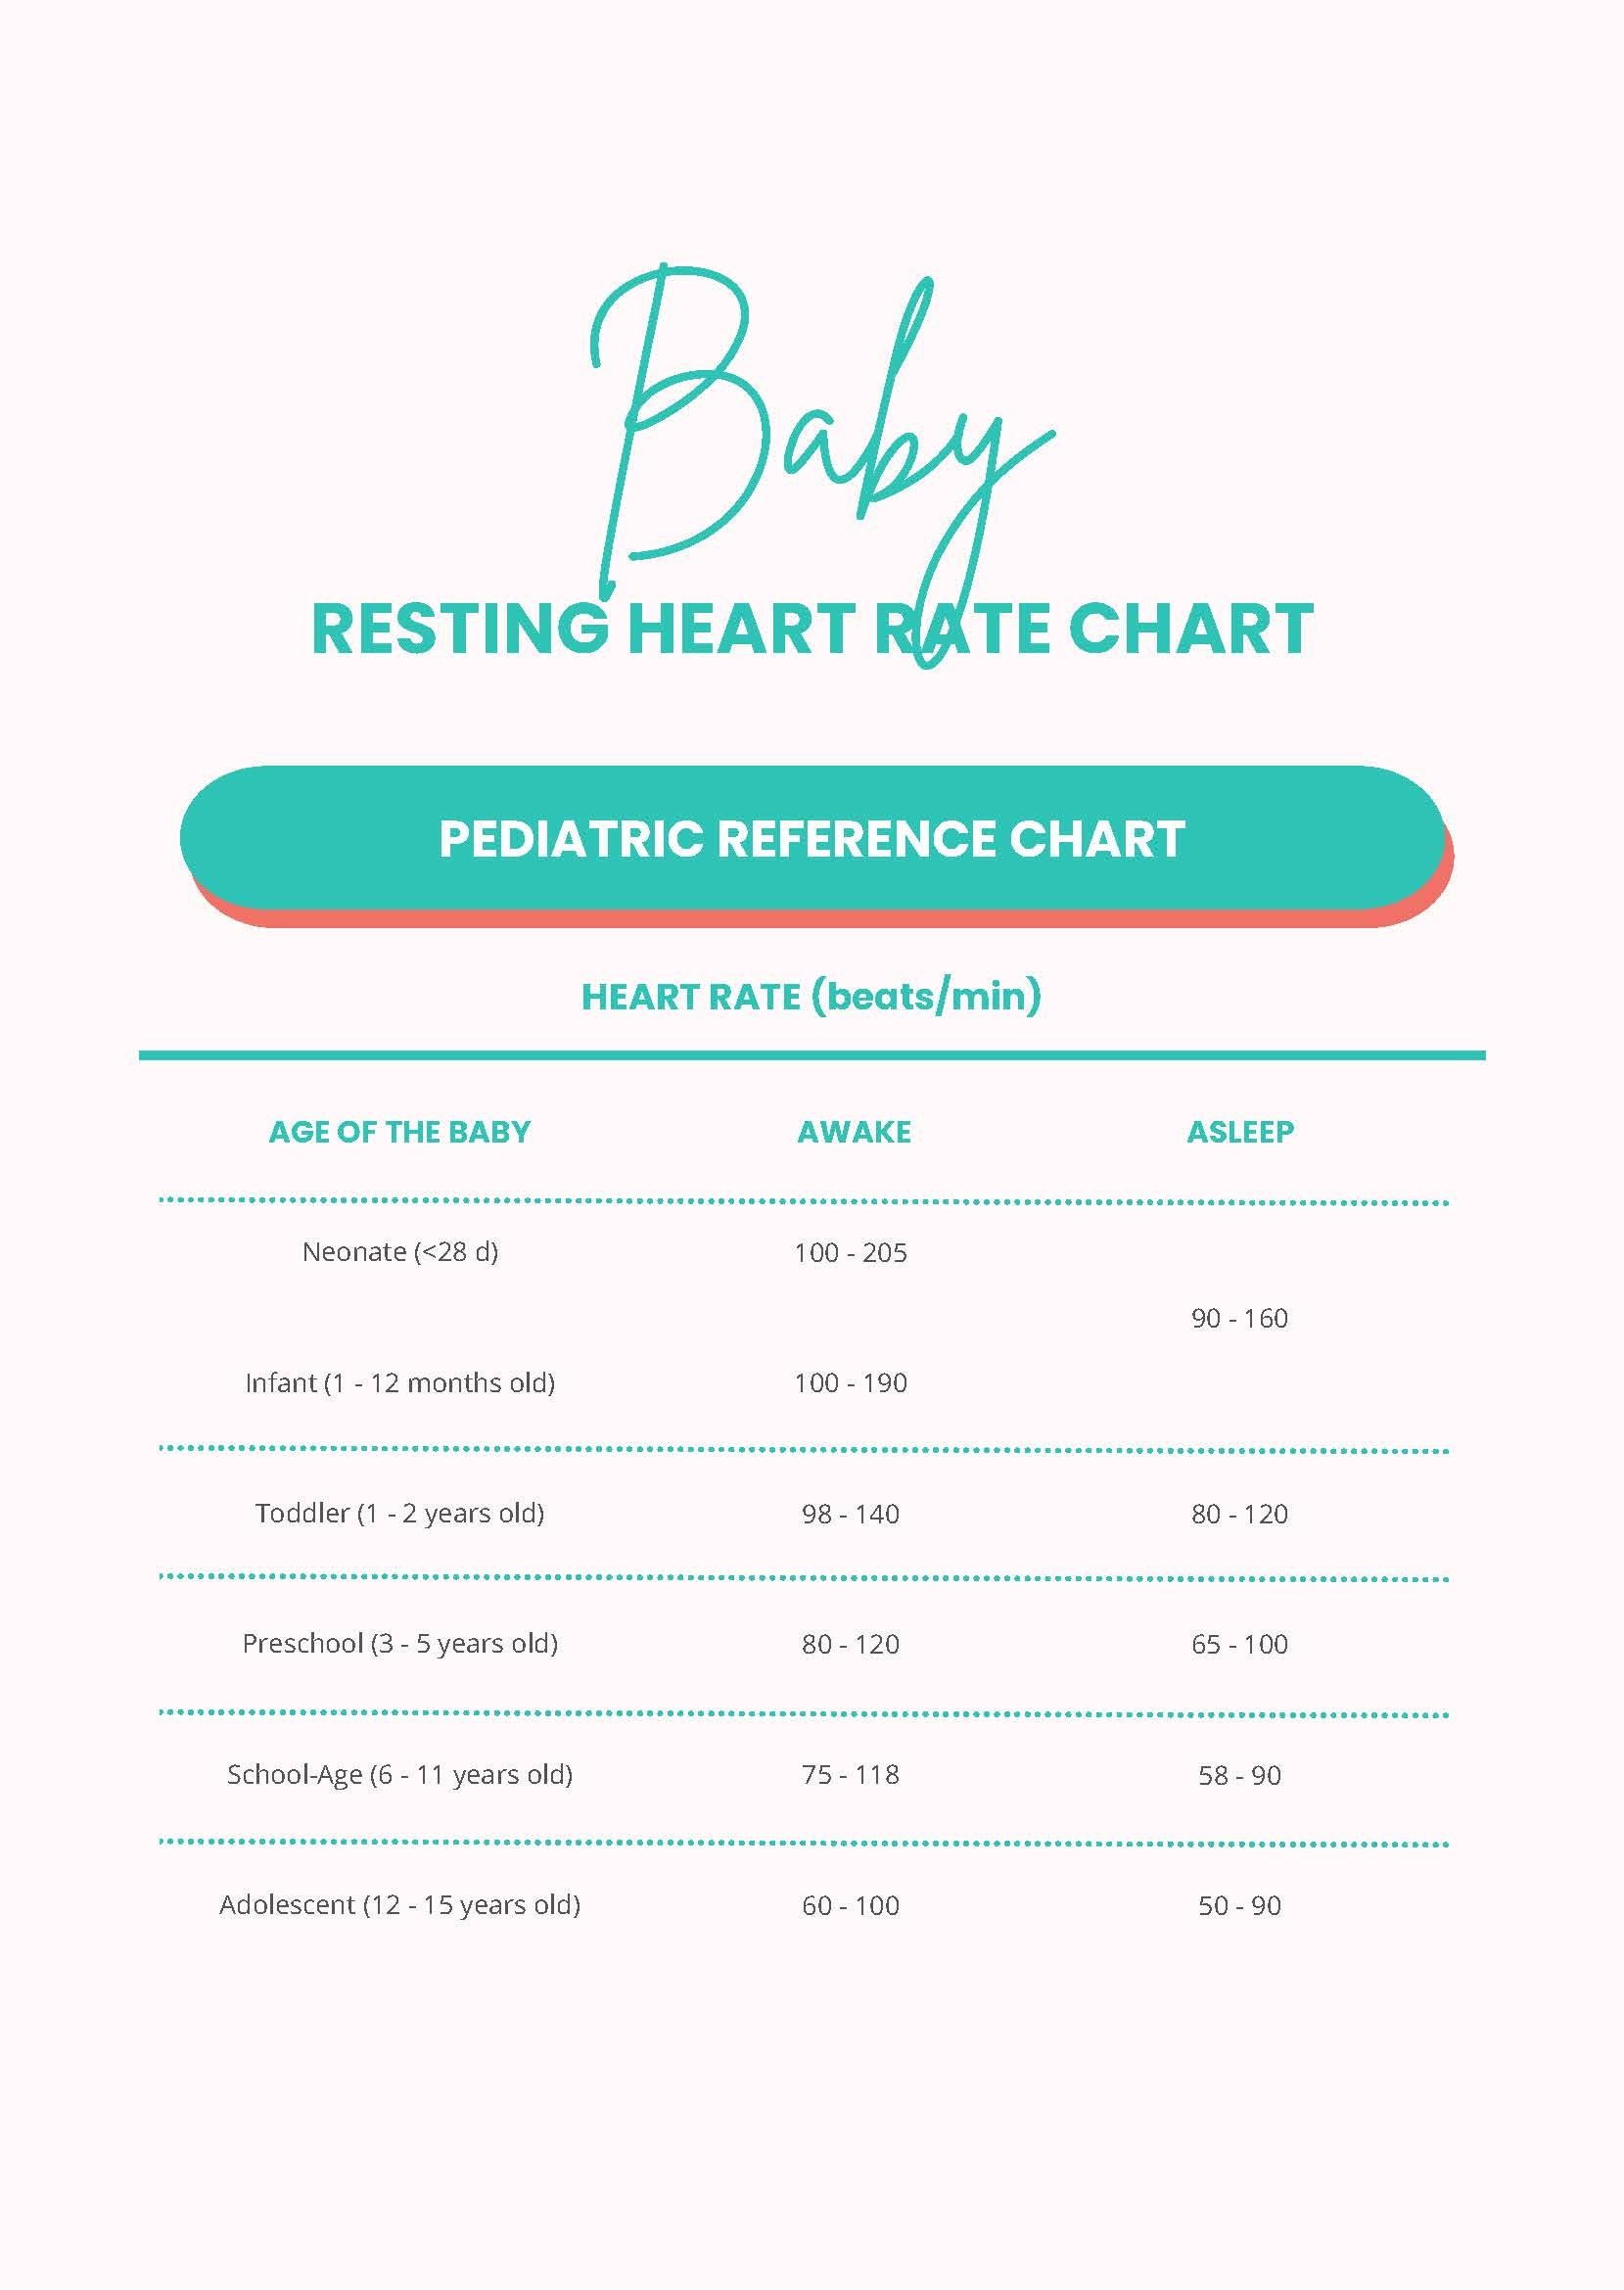 Baby Resting Heart Rate Chart